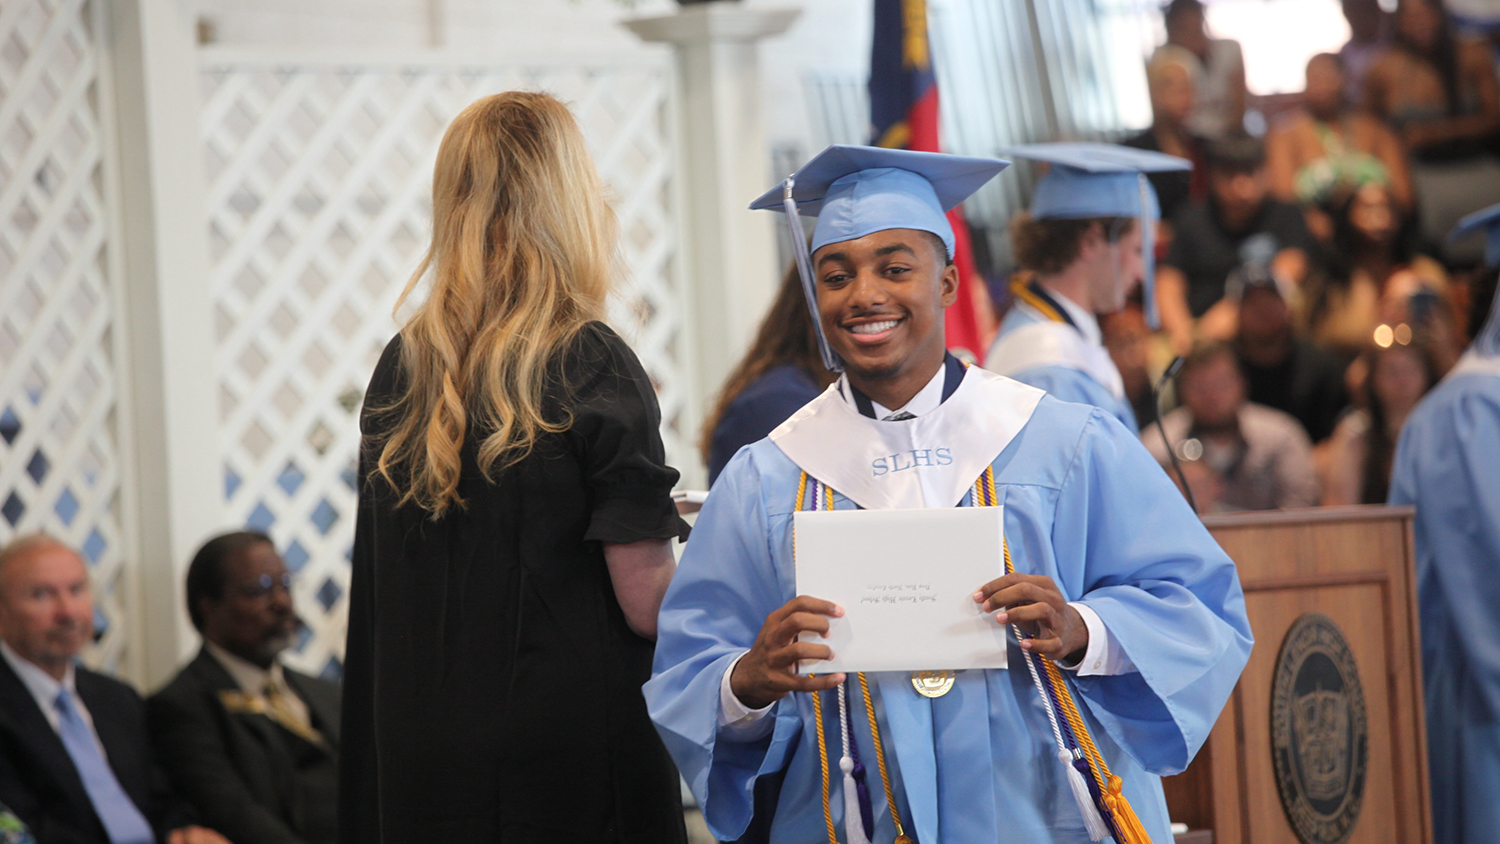 Zaire Garner receiving his high school diploma. He is dressed in a light blue cap and gown.